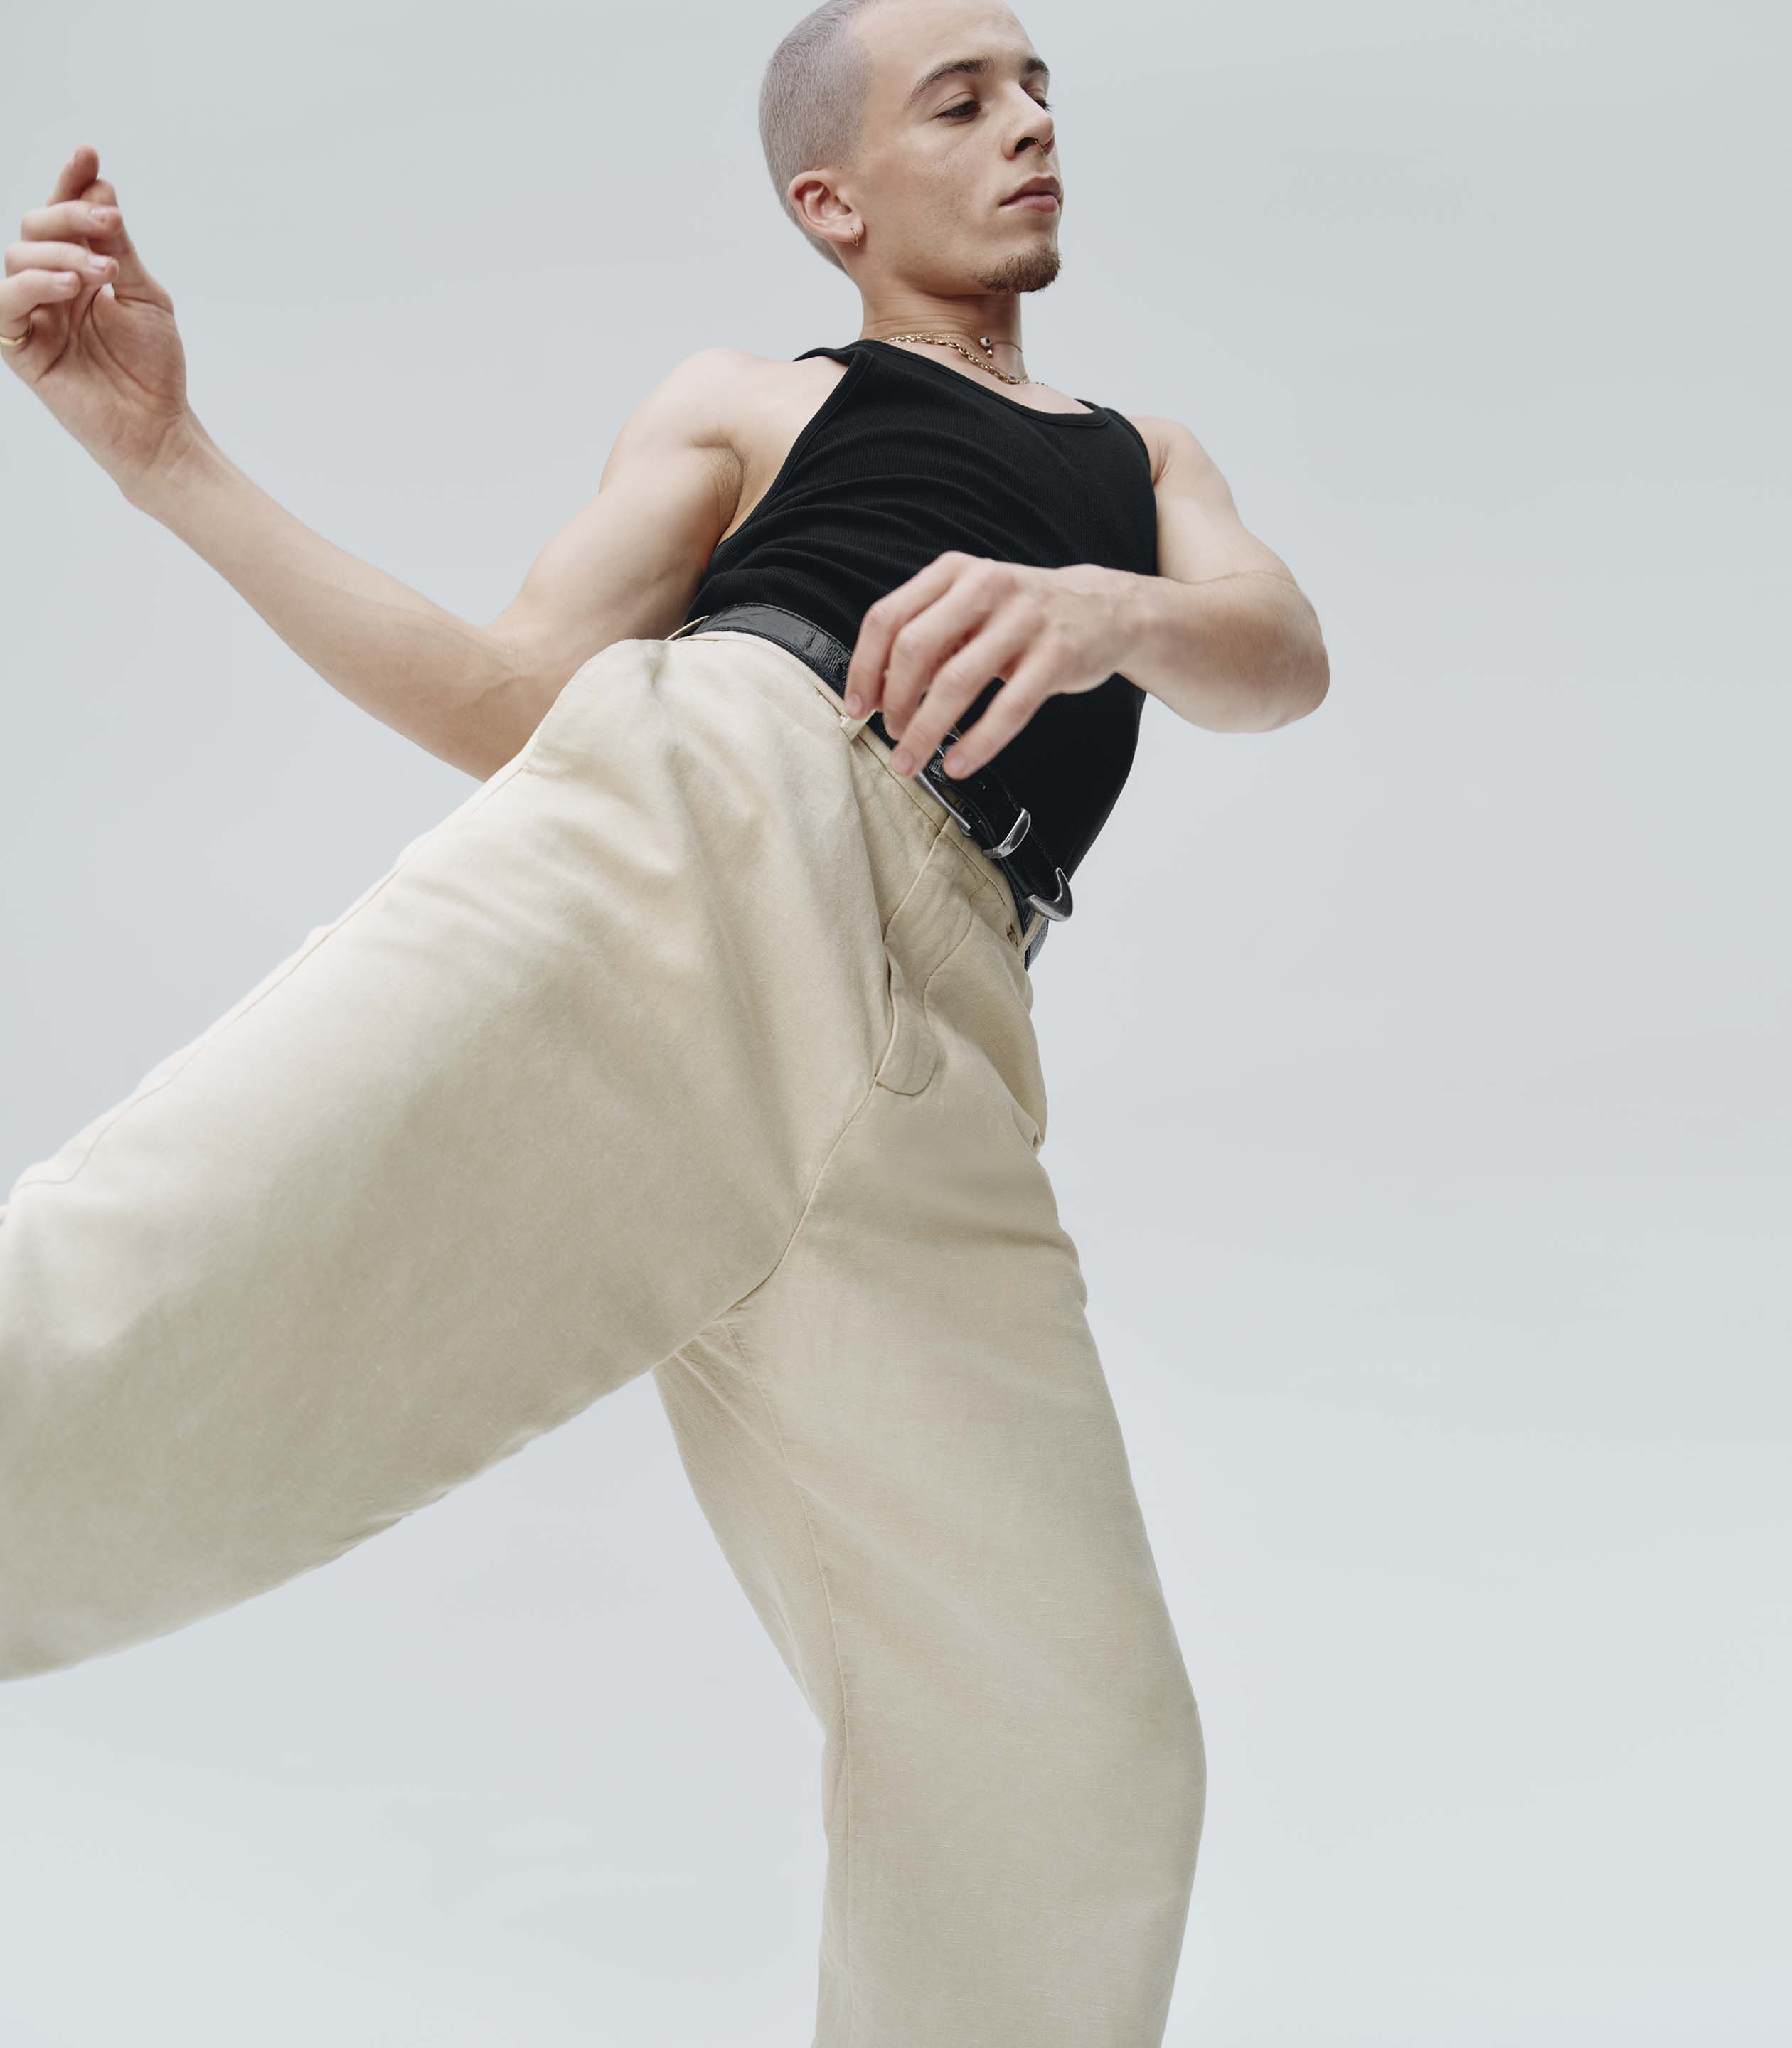 GAP spring campaign featuring dancers and tyla moving in linen looks